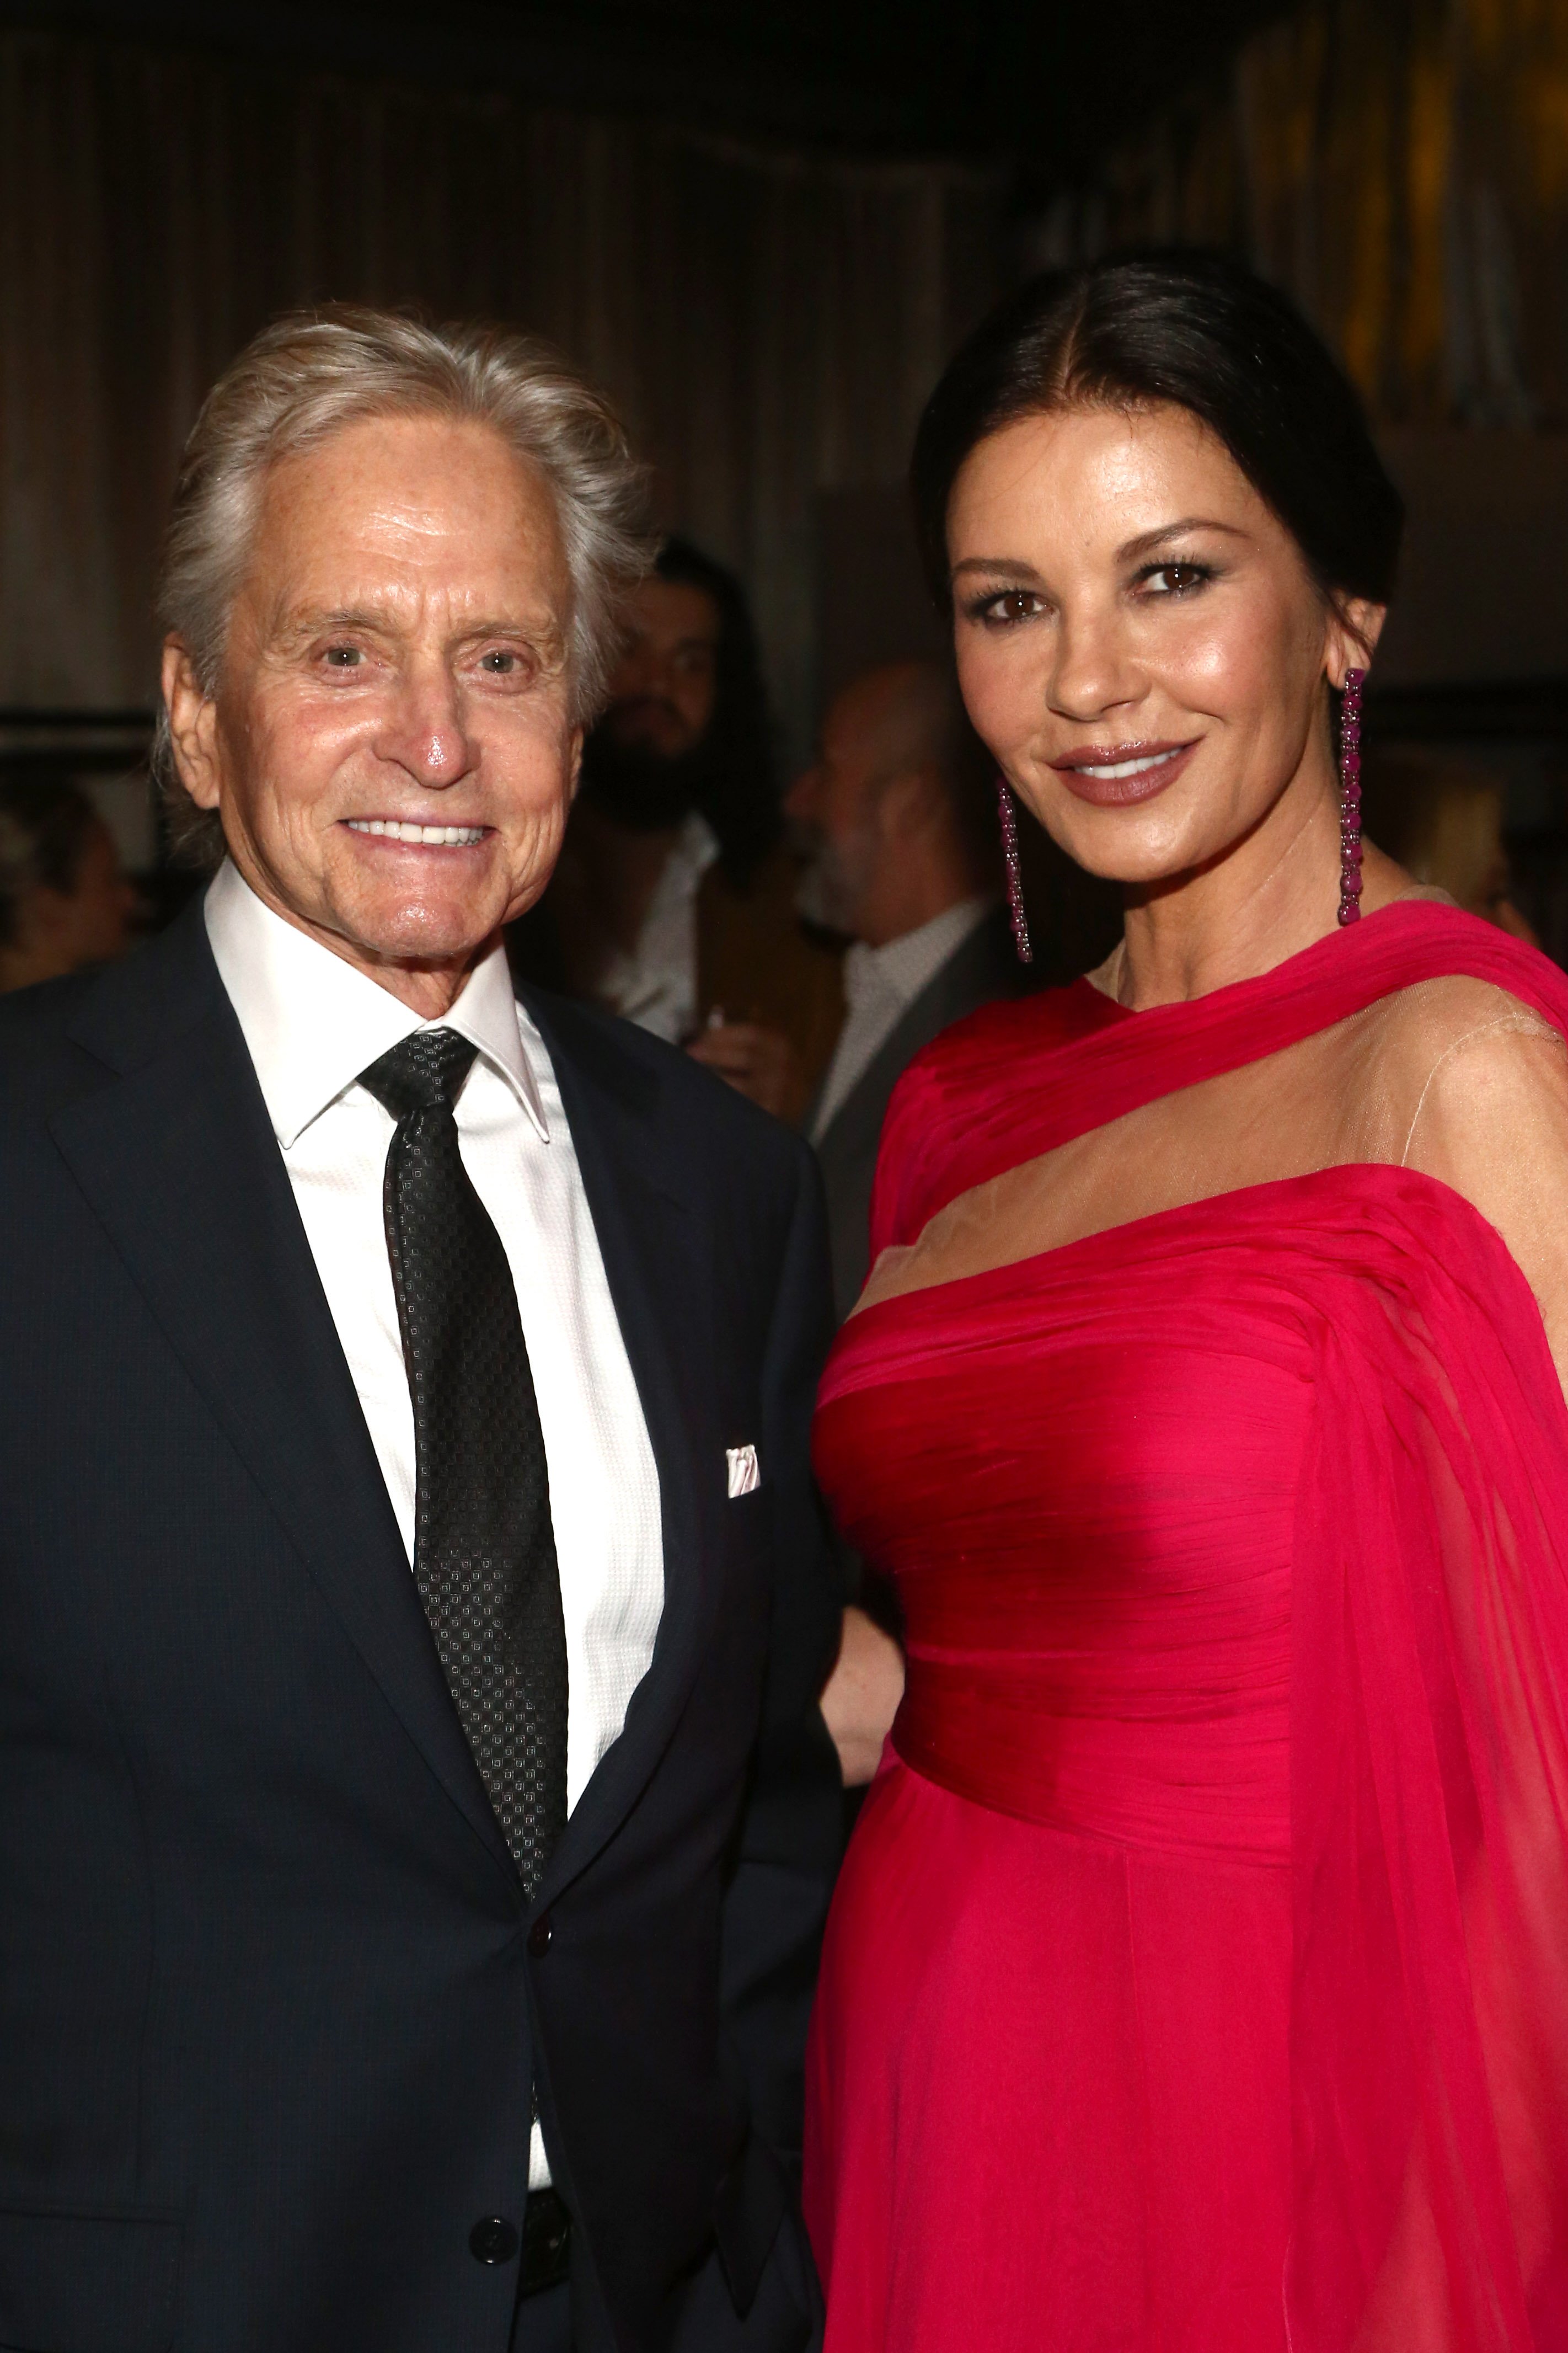 Michael Douglas and Catherine Zeta-Jones attend the Netflix's 71st Emmy Awards After Party on September 22, 2019. | Photo: Getty Images